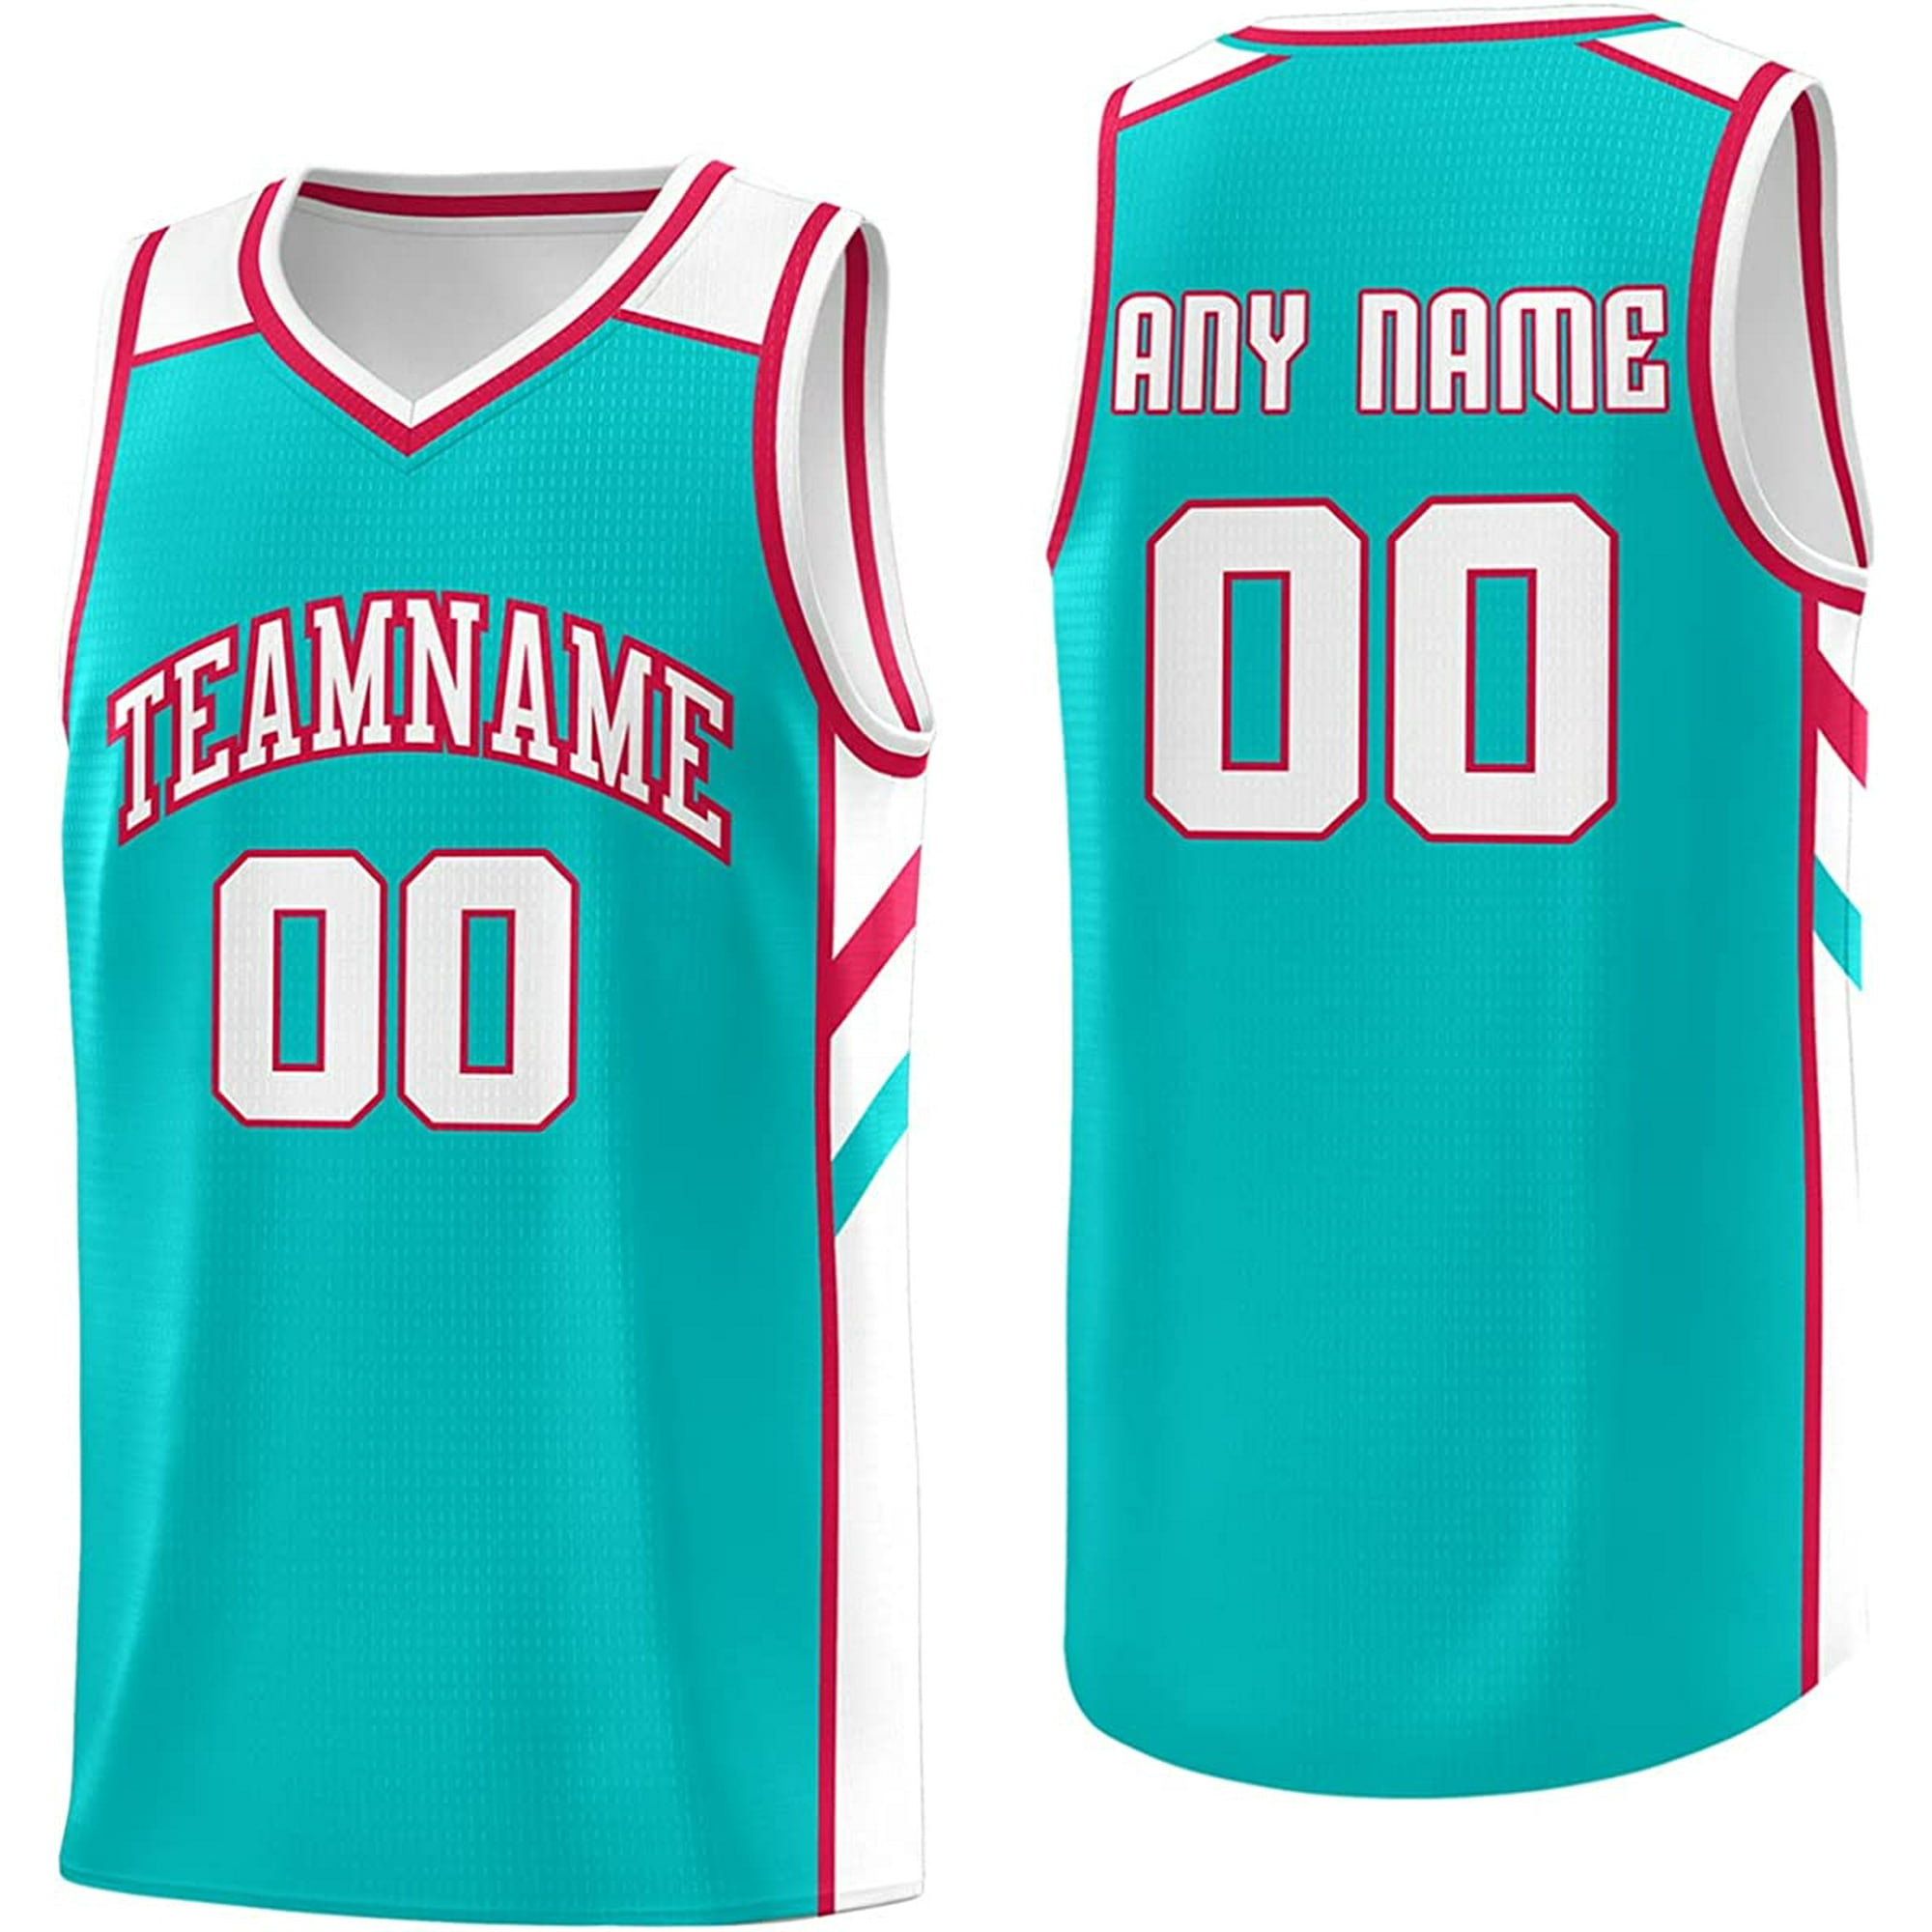 Custom Basketball Jersey Please tell Personalized Team Name and Number  after buy